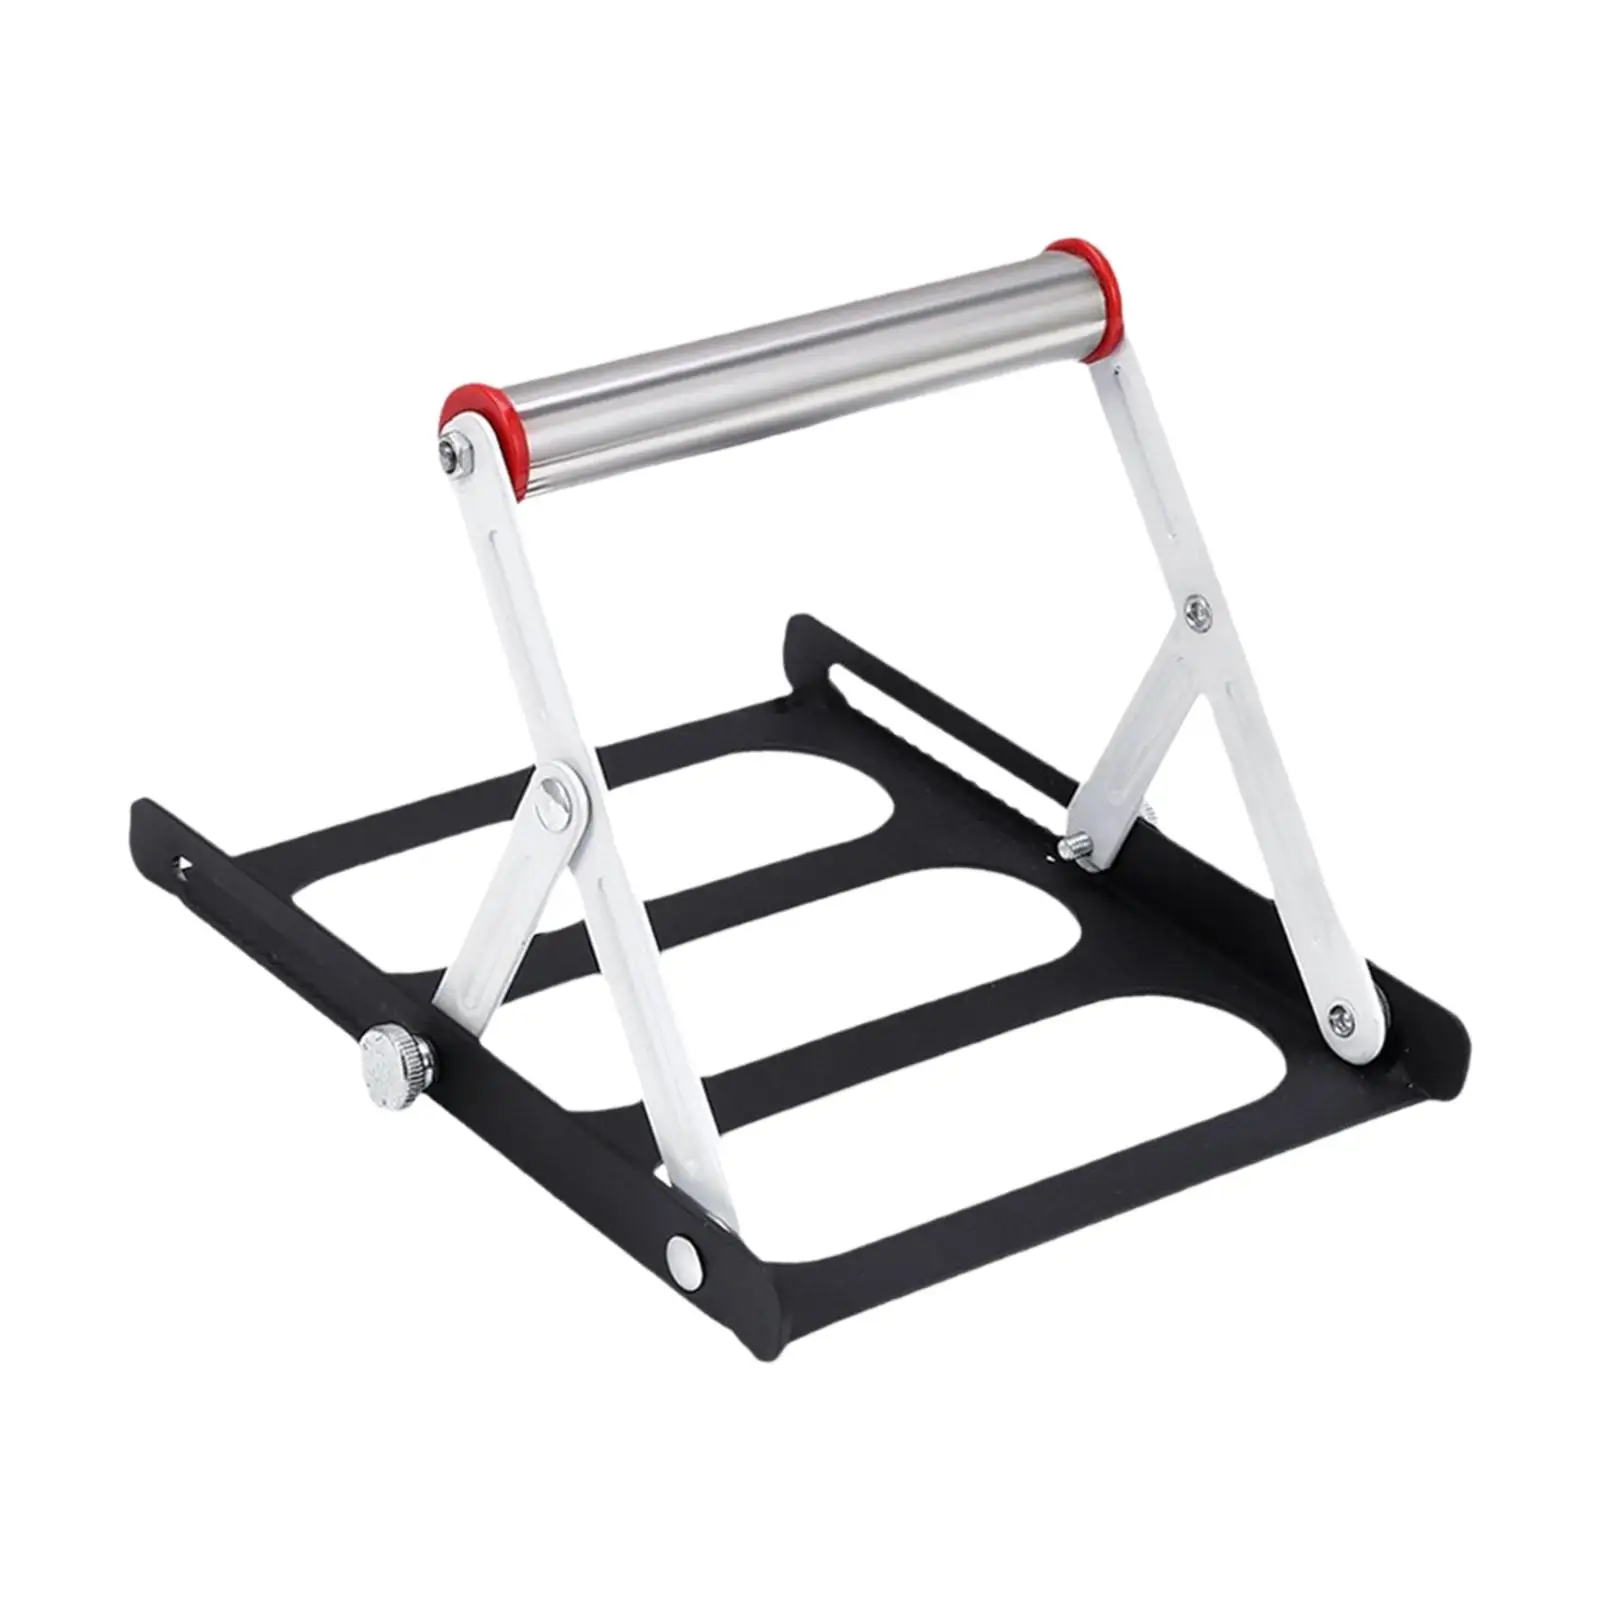 Cutting Machine Support Stand, Table Saw Stand, Foldable Portable Material Support Stand for Professional